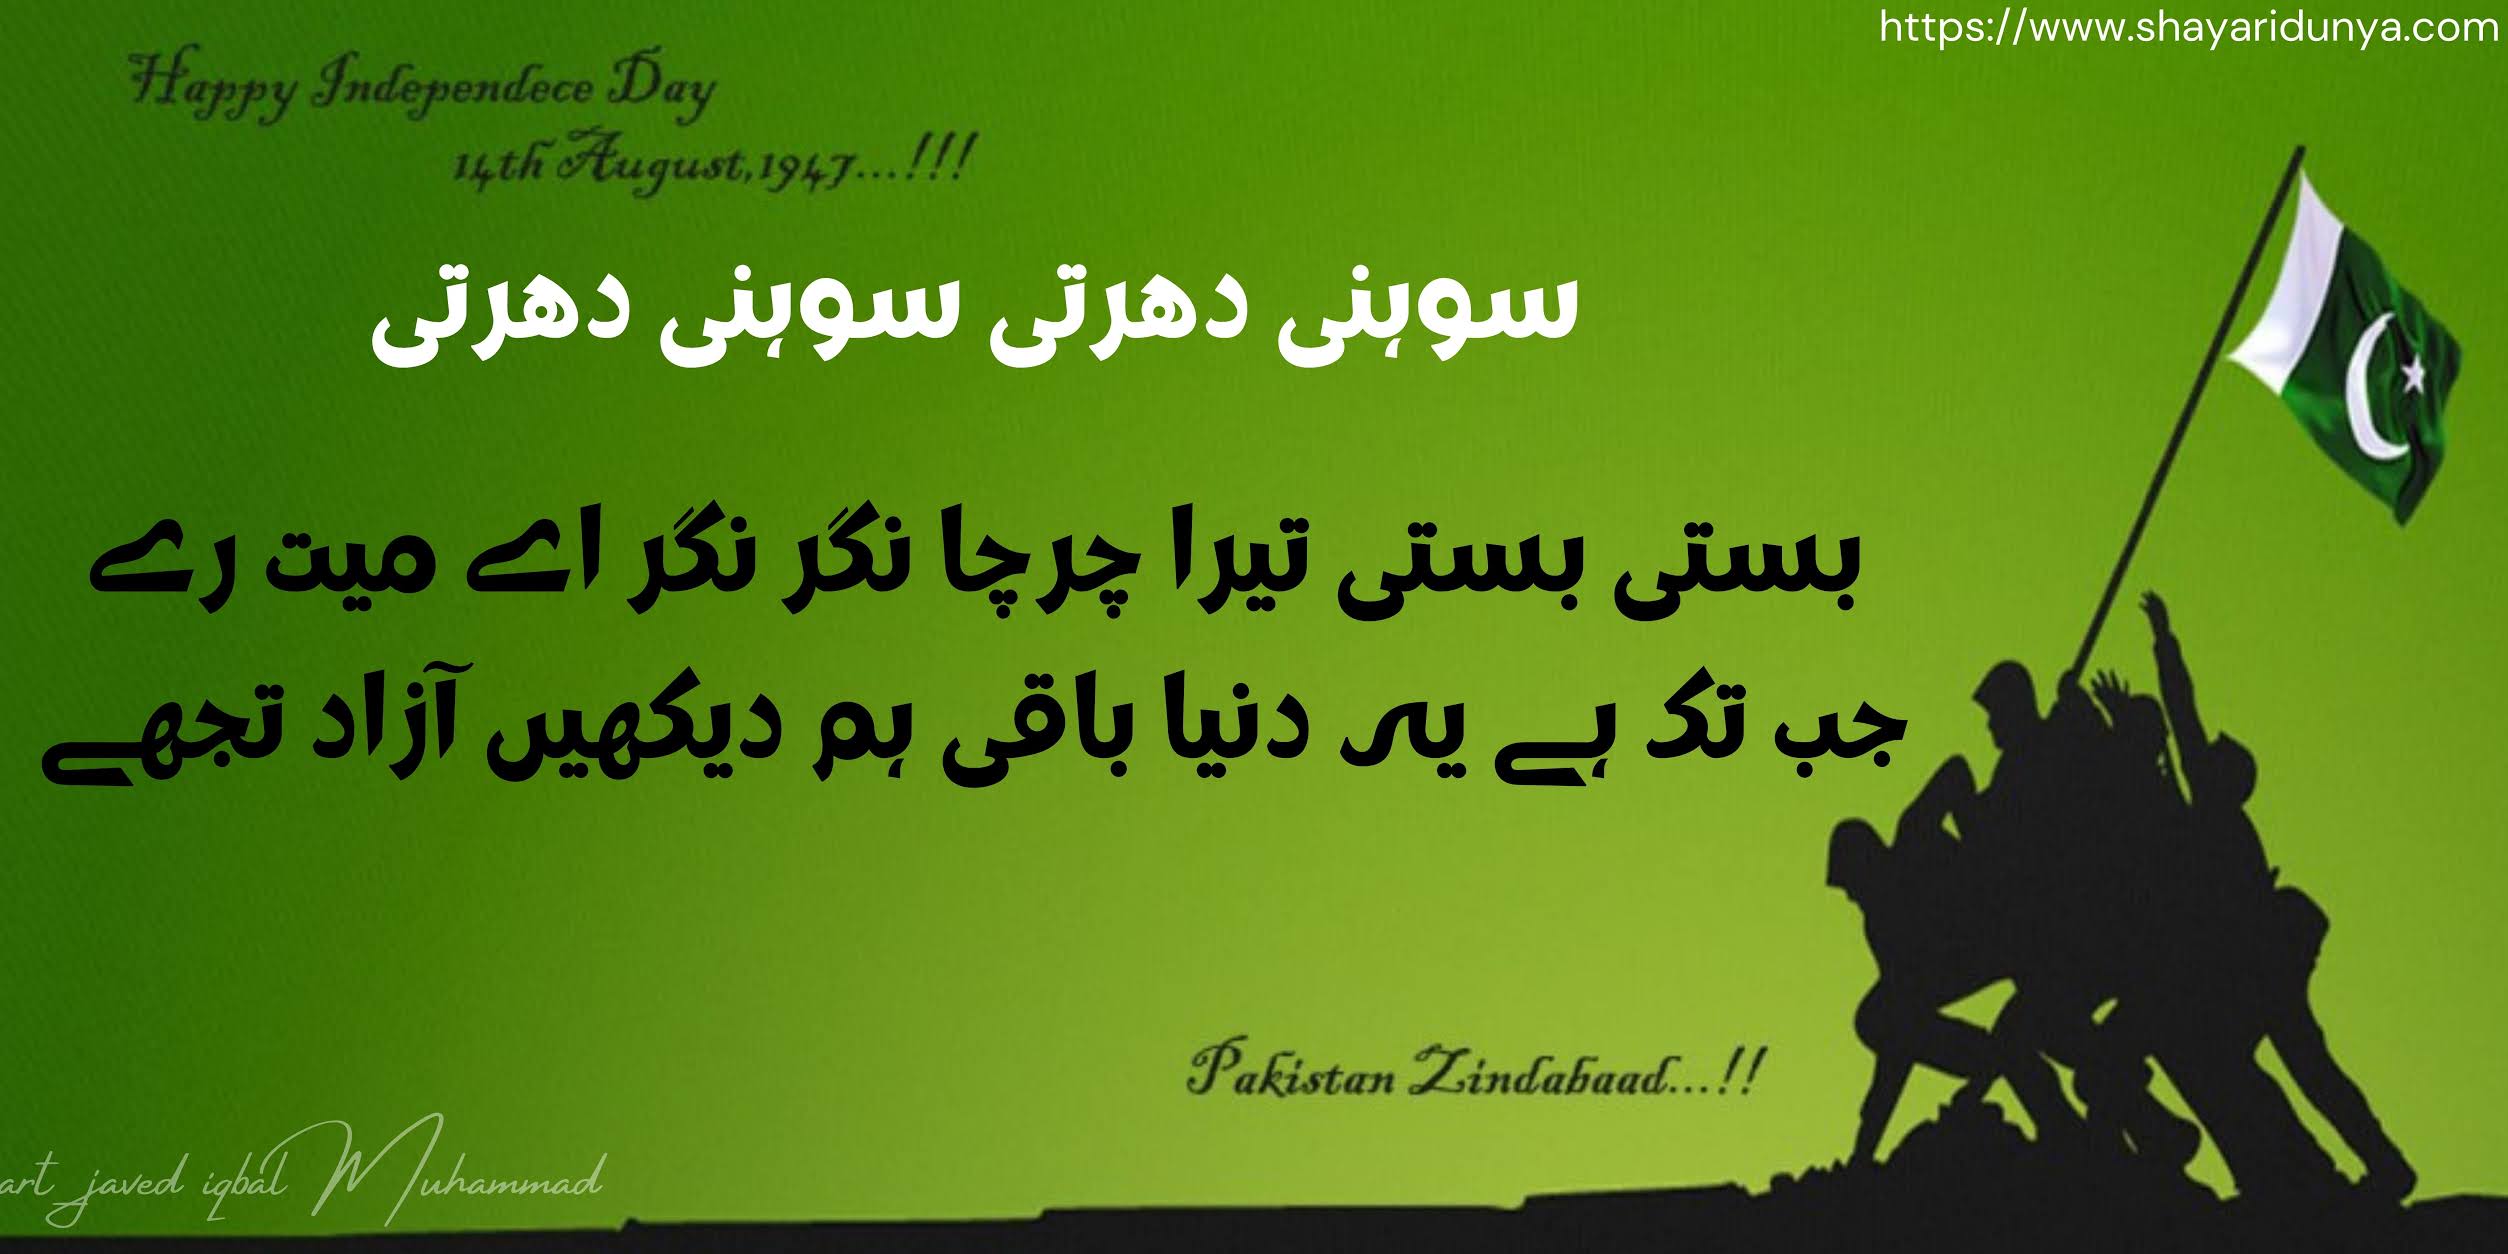 Happy-Independence-Day-14-August-1947-14-August -Urdu-Poetry -Jashan-e-Azadi -Shayari-Pakistan Independence-Day-Pictures-2021